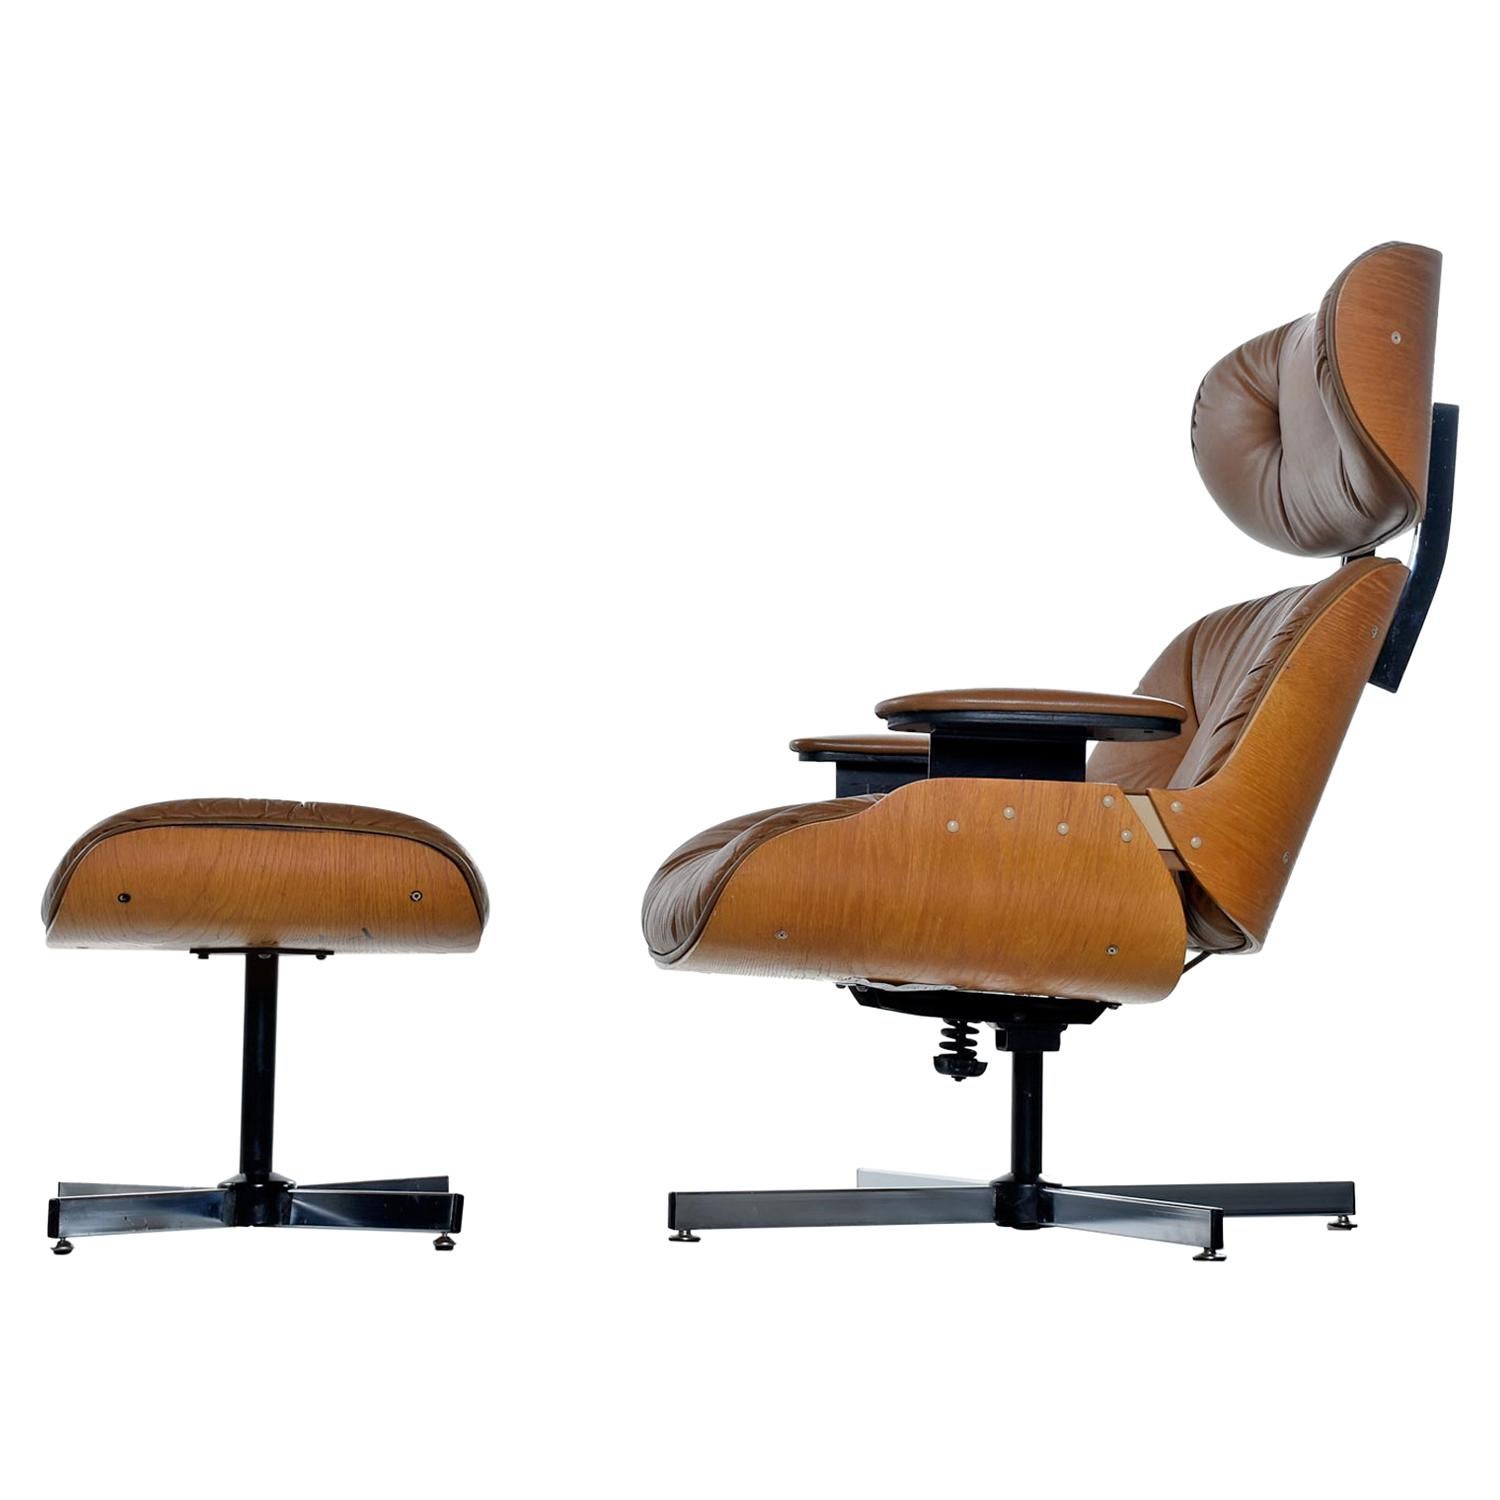 Mid-Century Modern swivel lounge chair and matching ottoman. The original tag is missing, but it's most likely made by Selig or Plycraft. Gorgeous tufted cognac / caramel faux leather with bentwood beech wood frame. The aluminum base has an